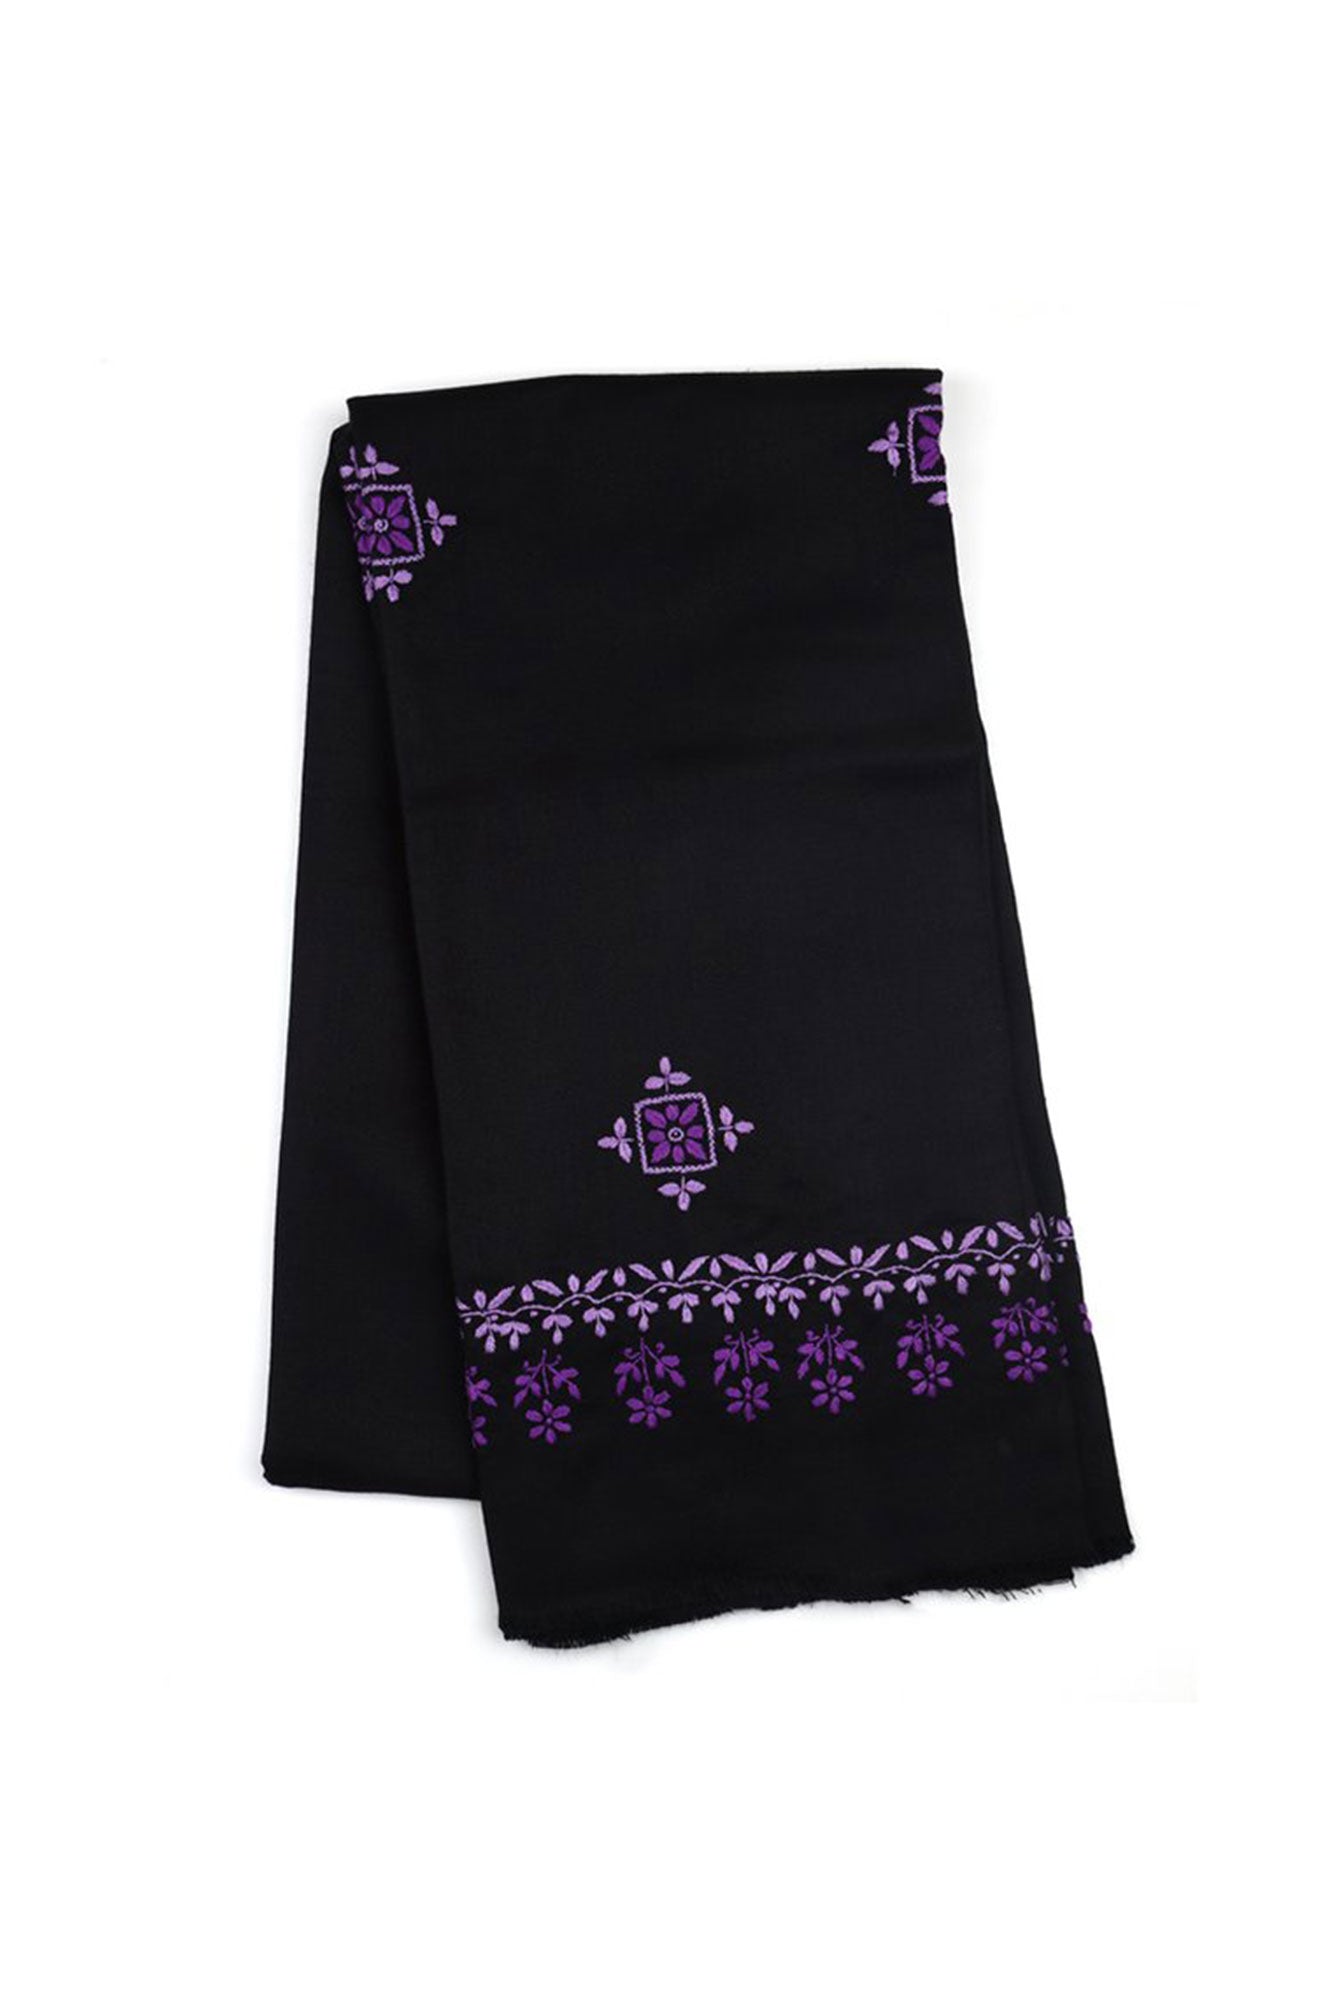 BLACK WOOLLEN SHAWL WITH MAUVE AND LAVENDER CHIKANKARI EMBROIDERY